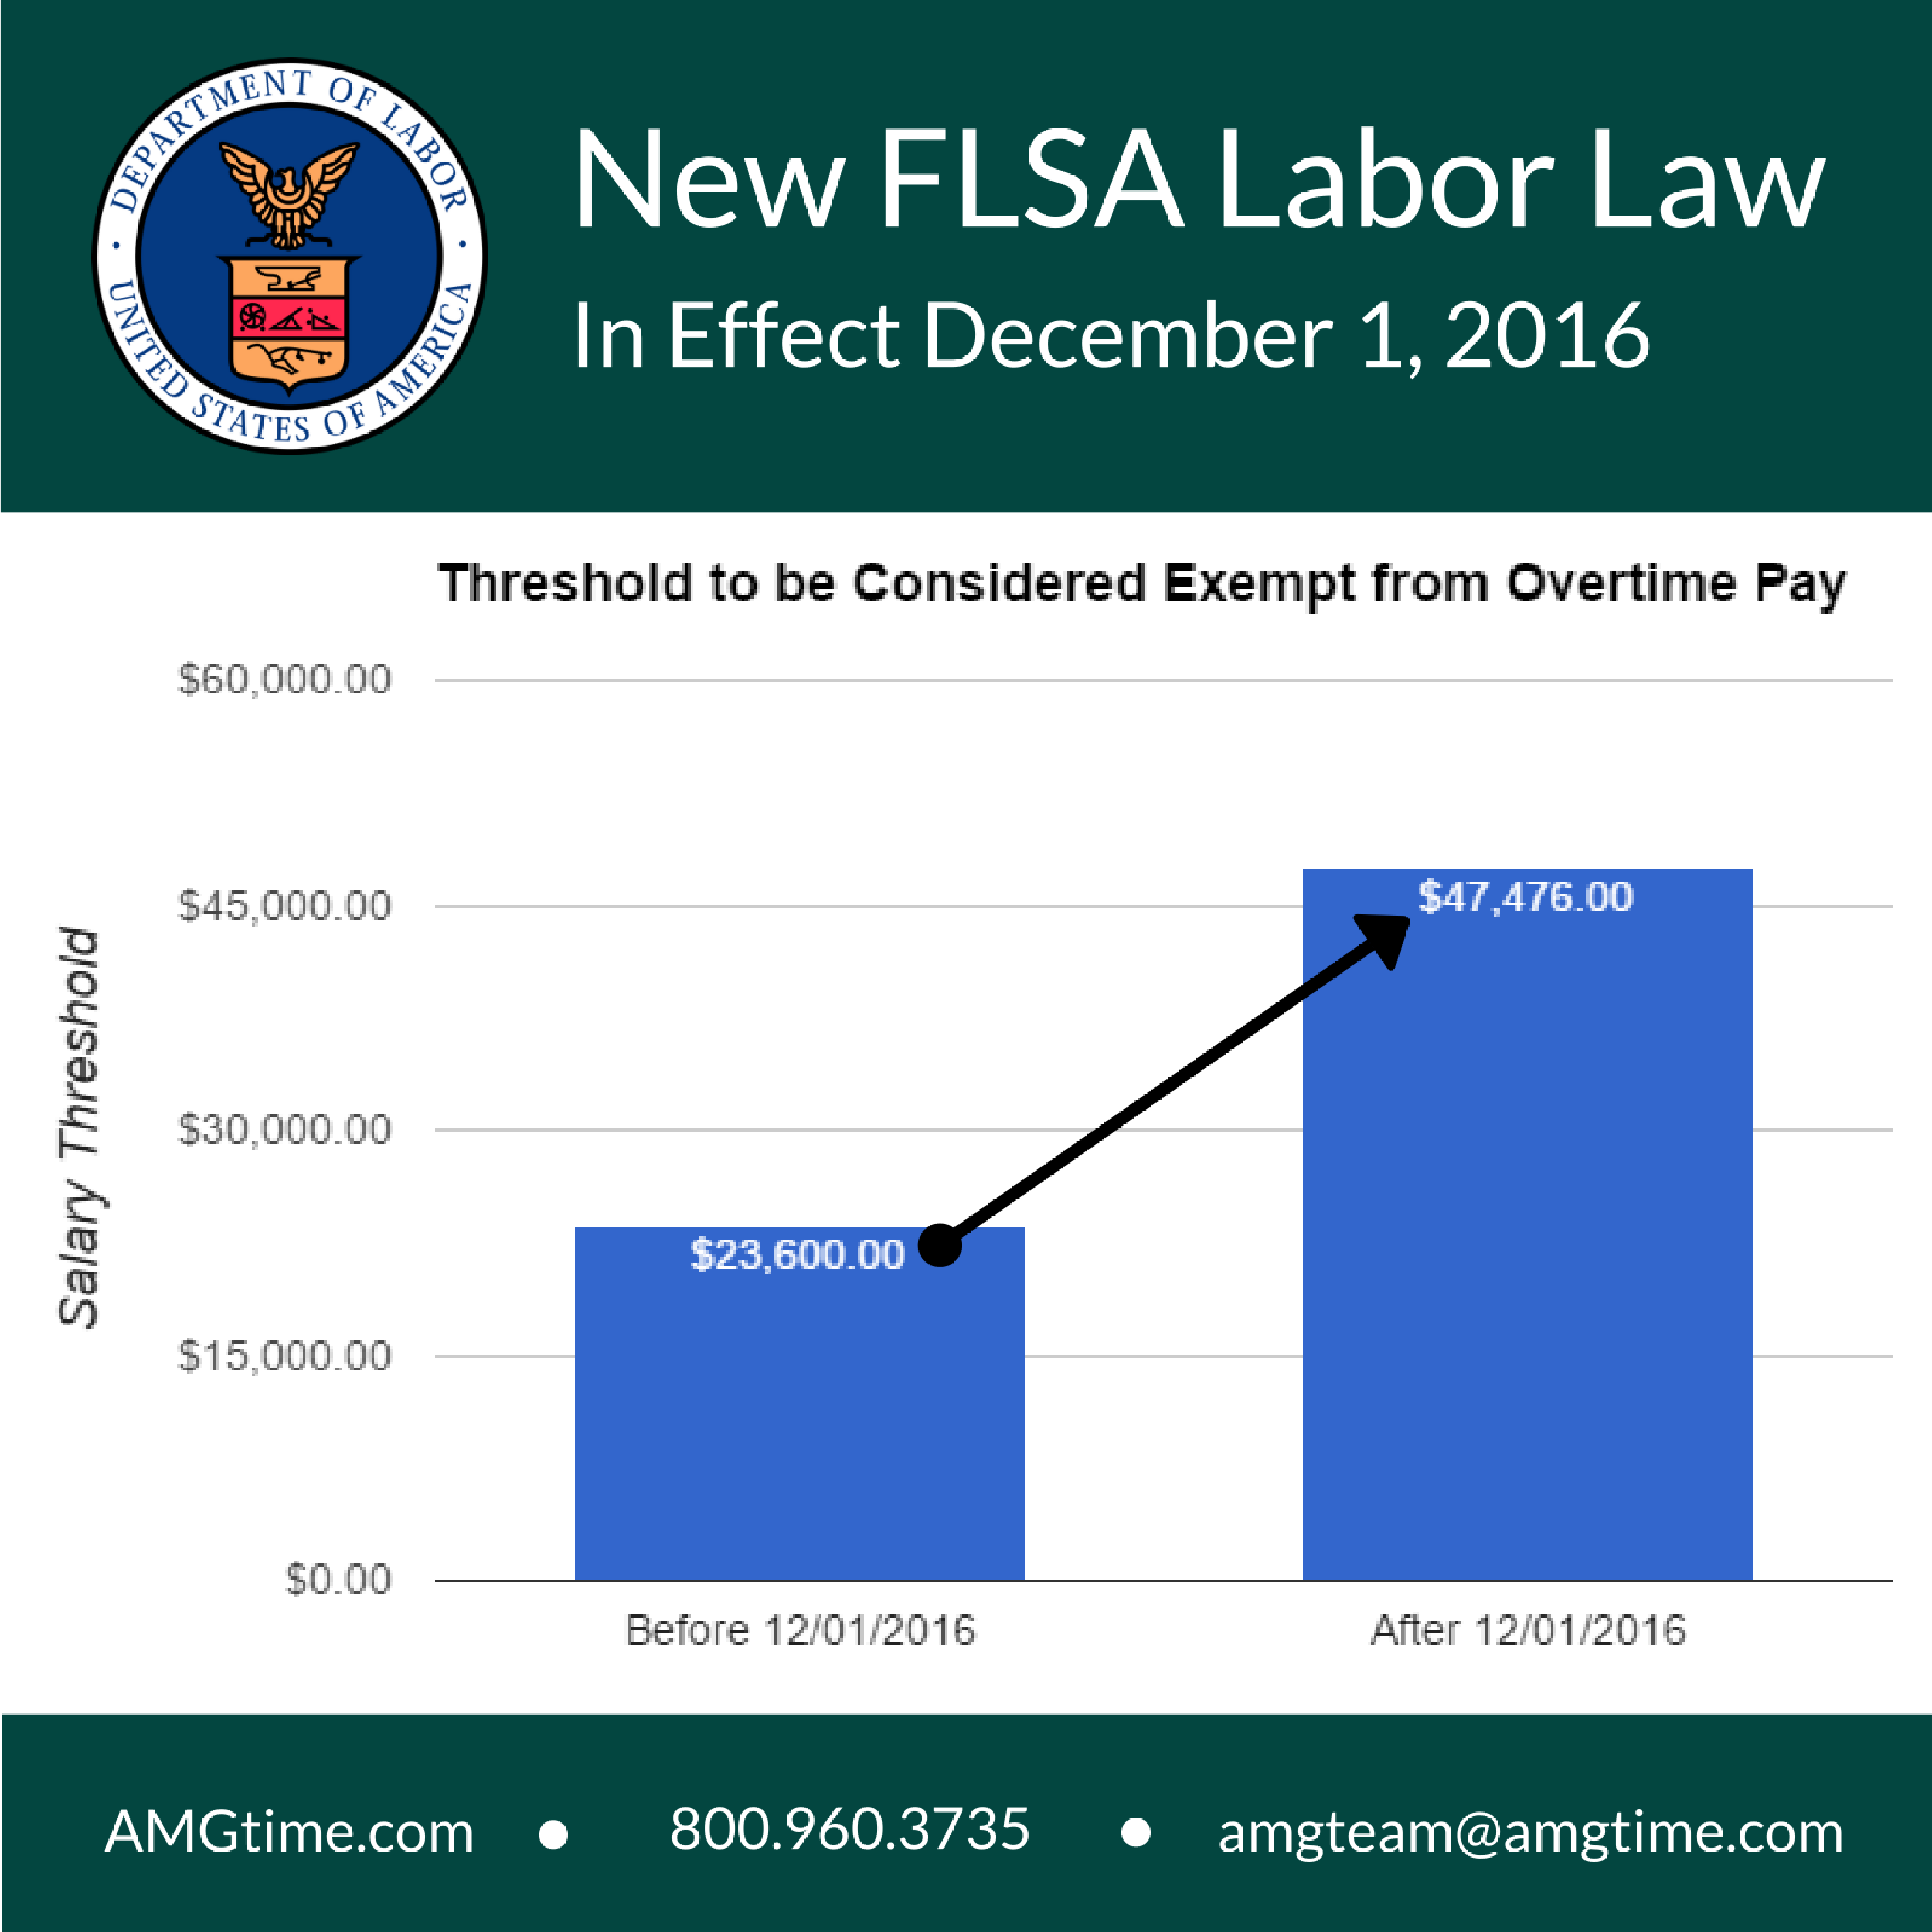 AMGtime Prepares Companies for Increasing Labor Costs Due to the FLSA